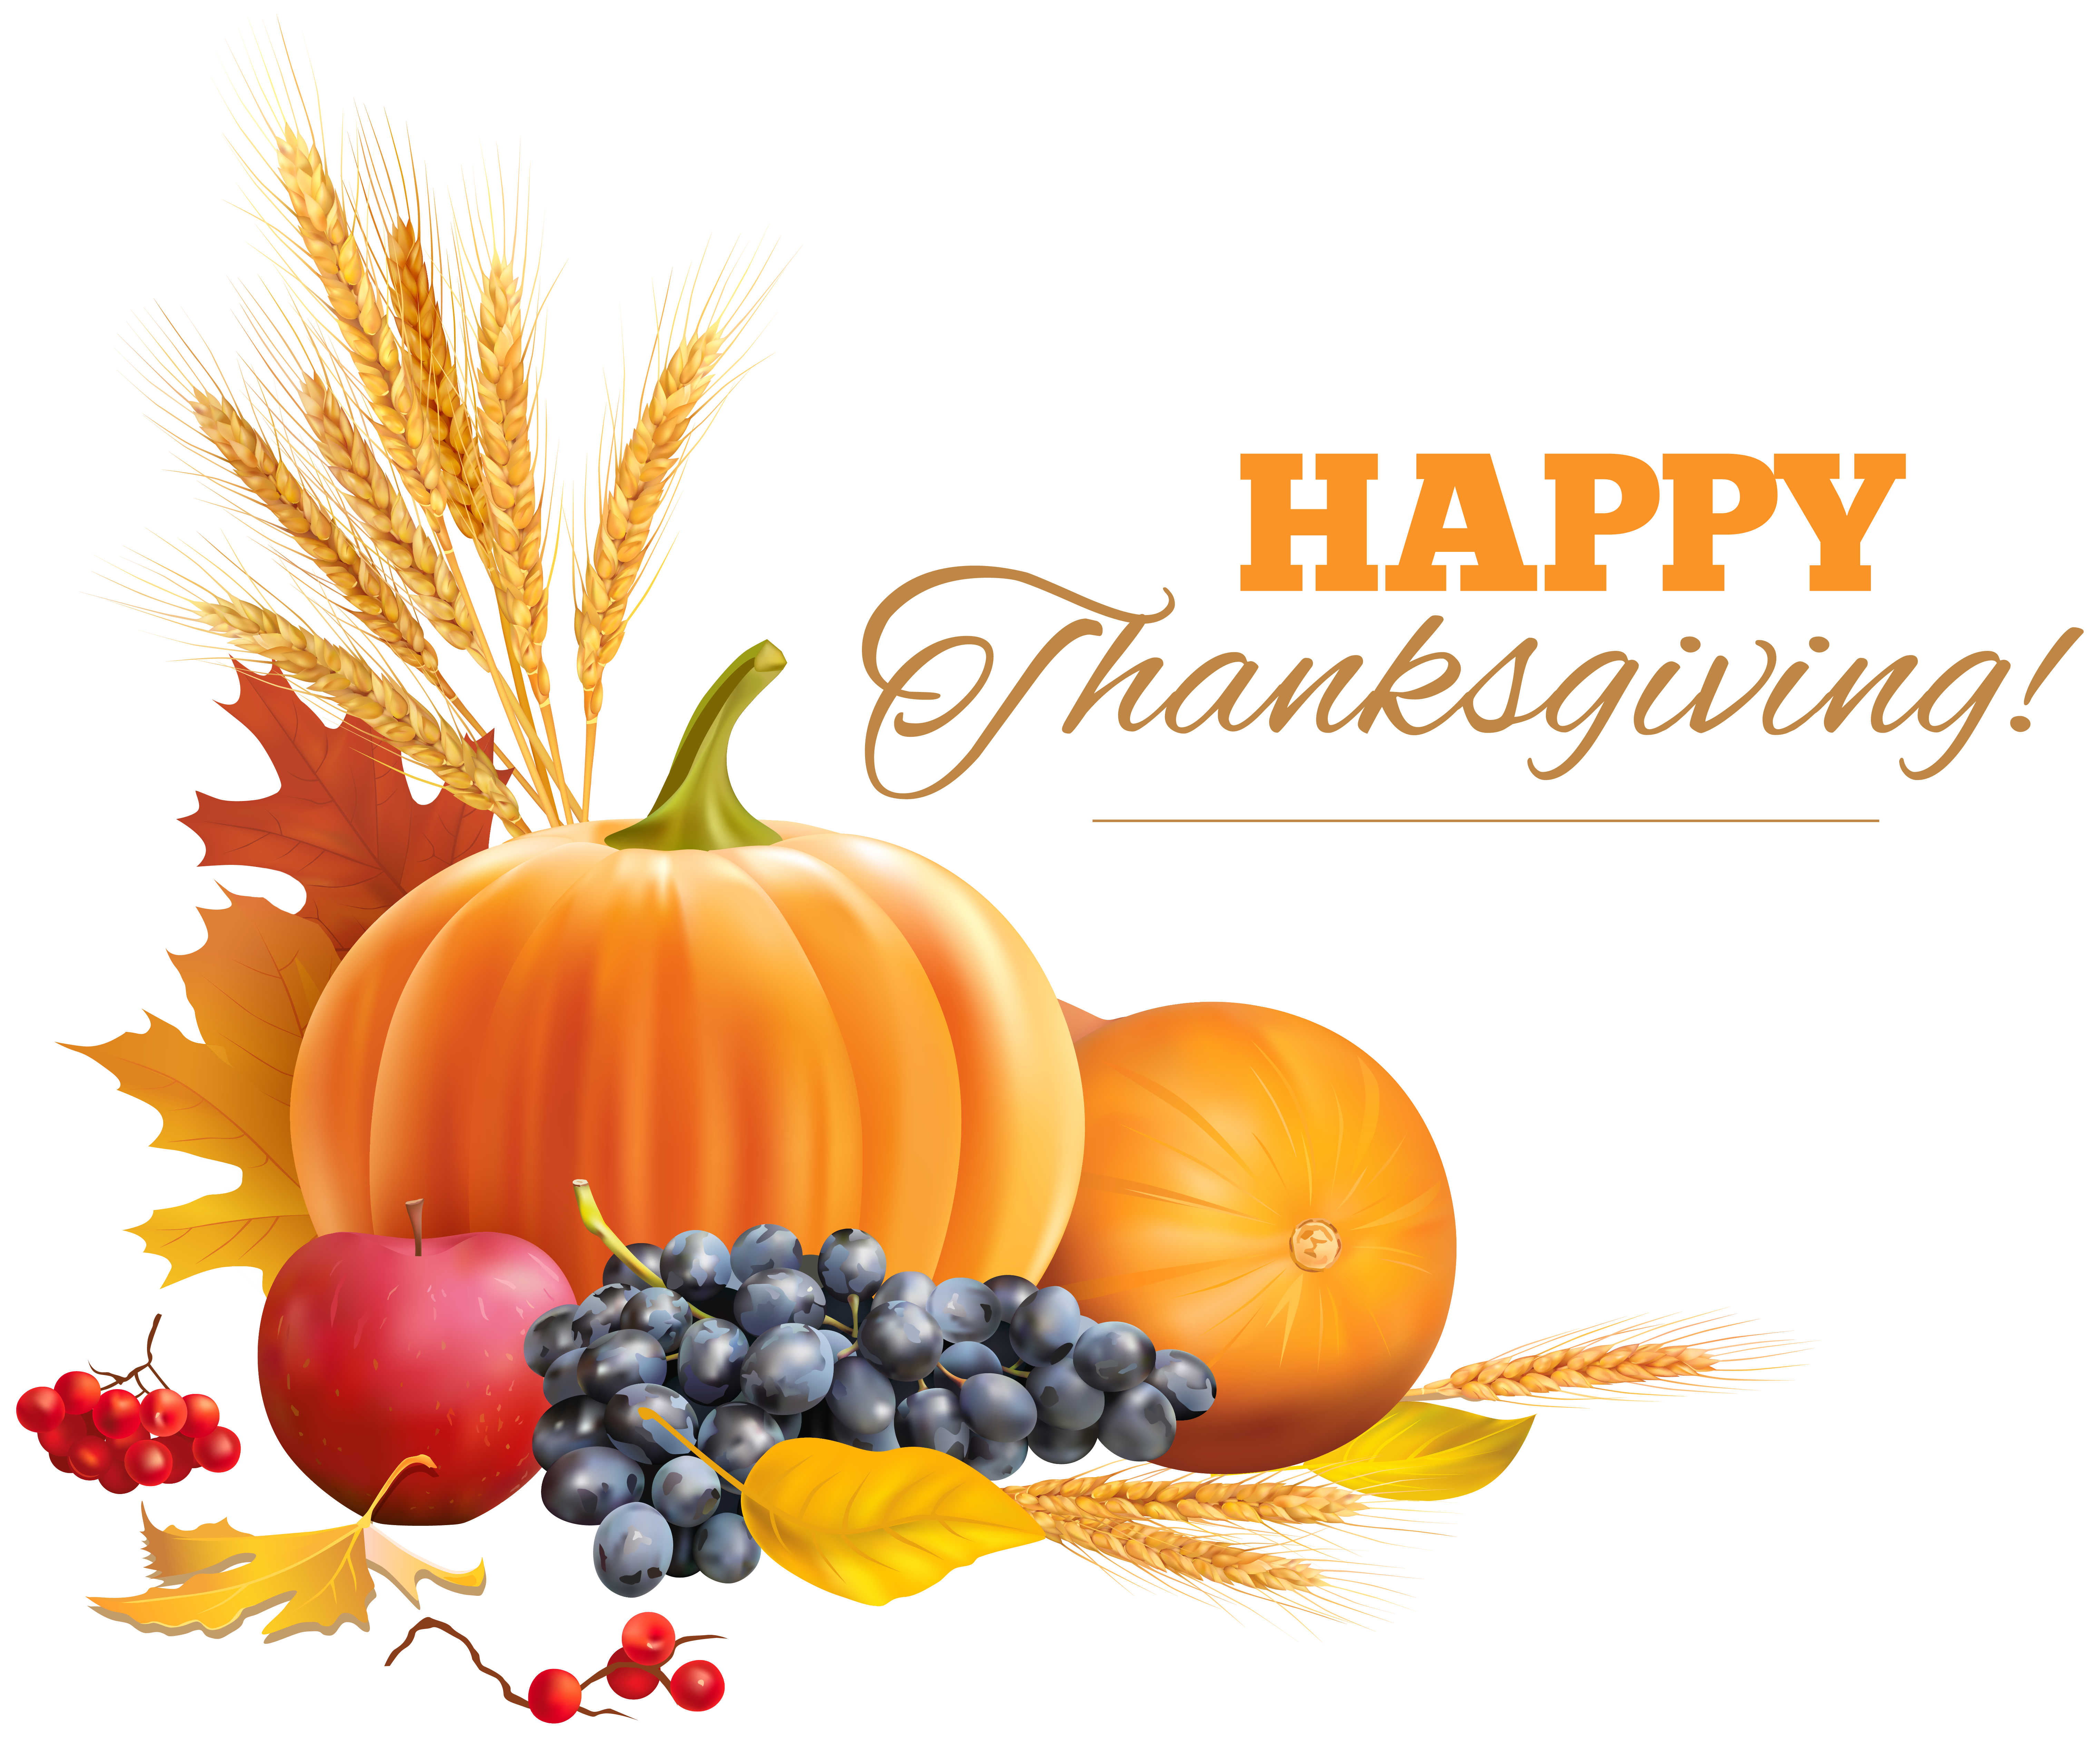 Happy Thanksgiving Decor PNG Clipart Image | Gallery Yopriceville - High-Quality ...6086 x 5033